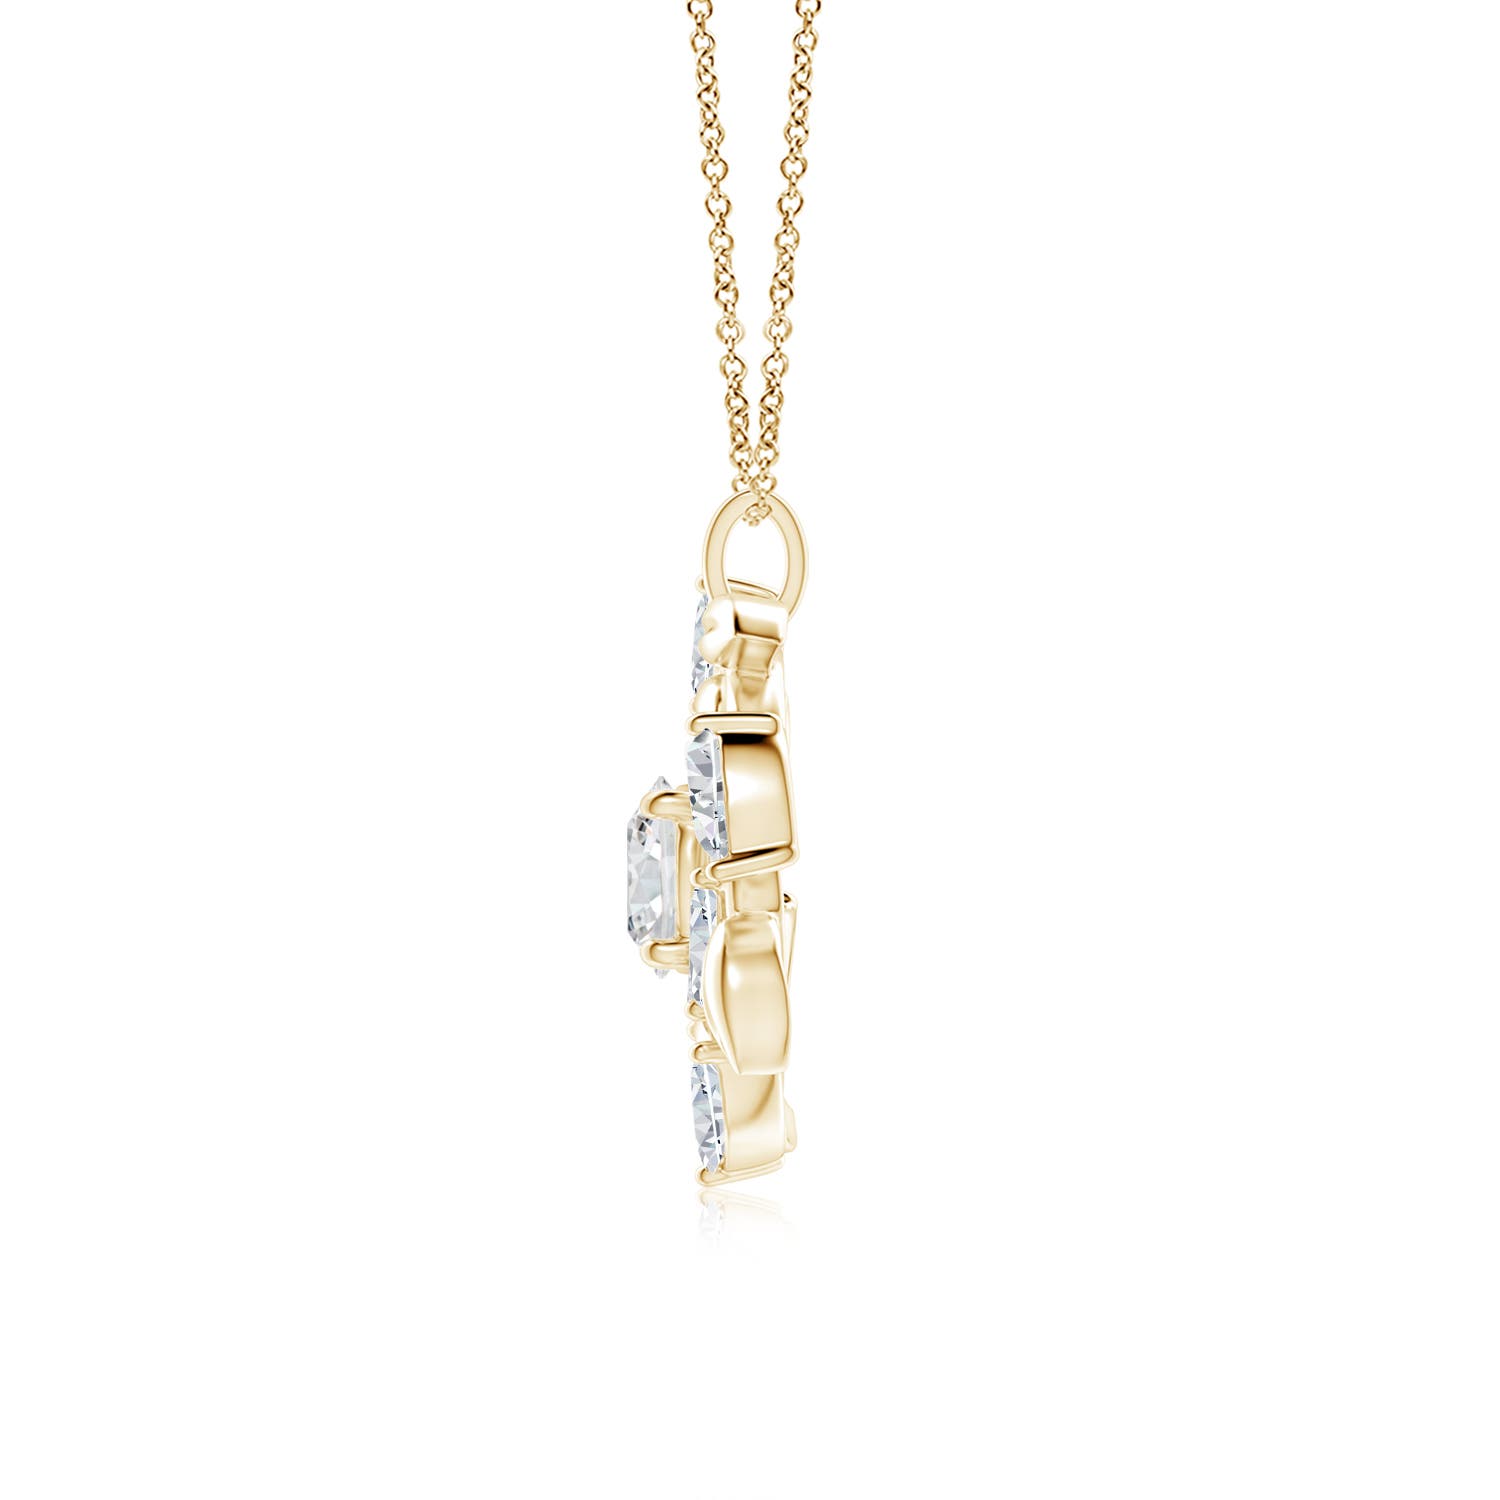 H, SI2 / 3.05 CT / 18 KT Yellow Gold